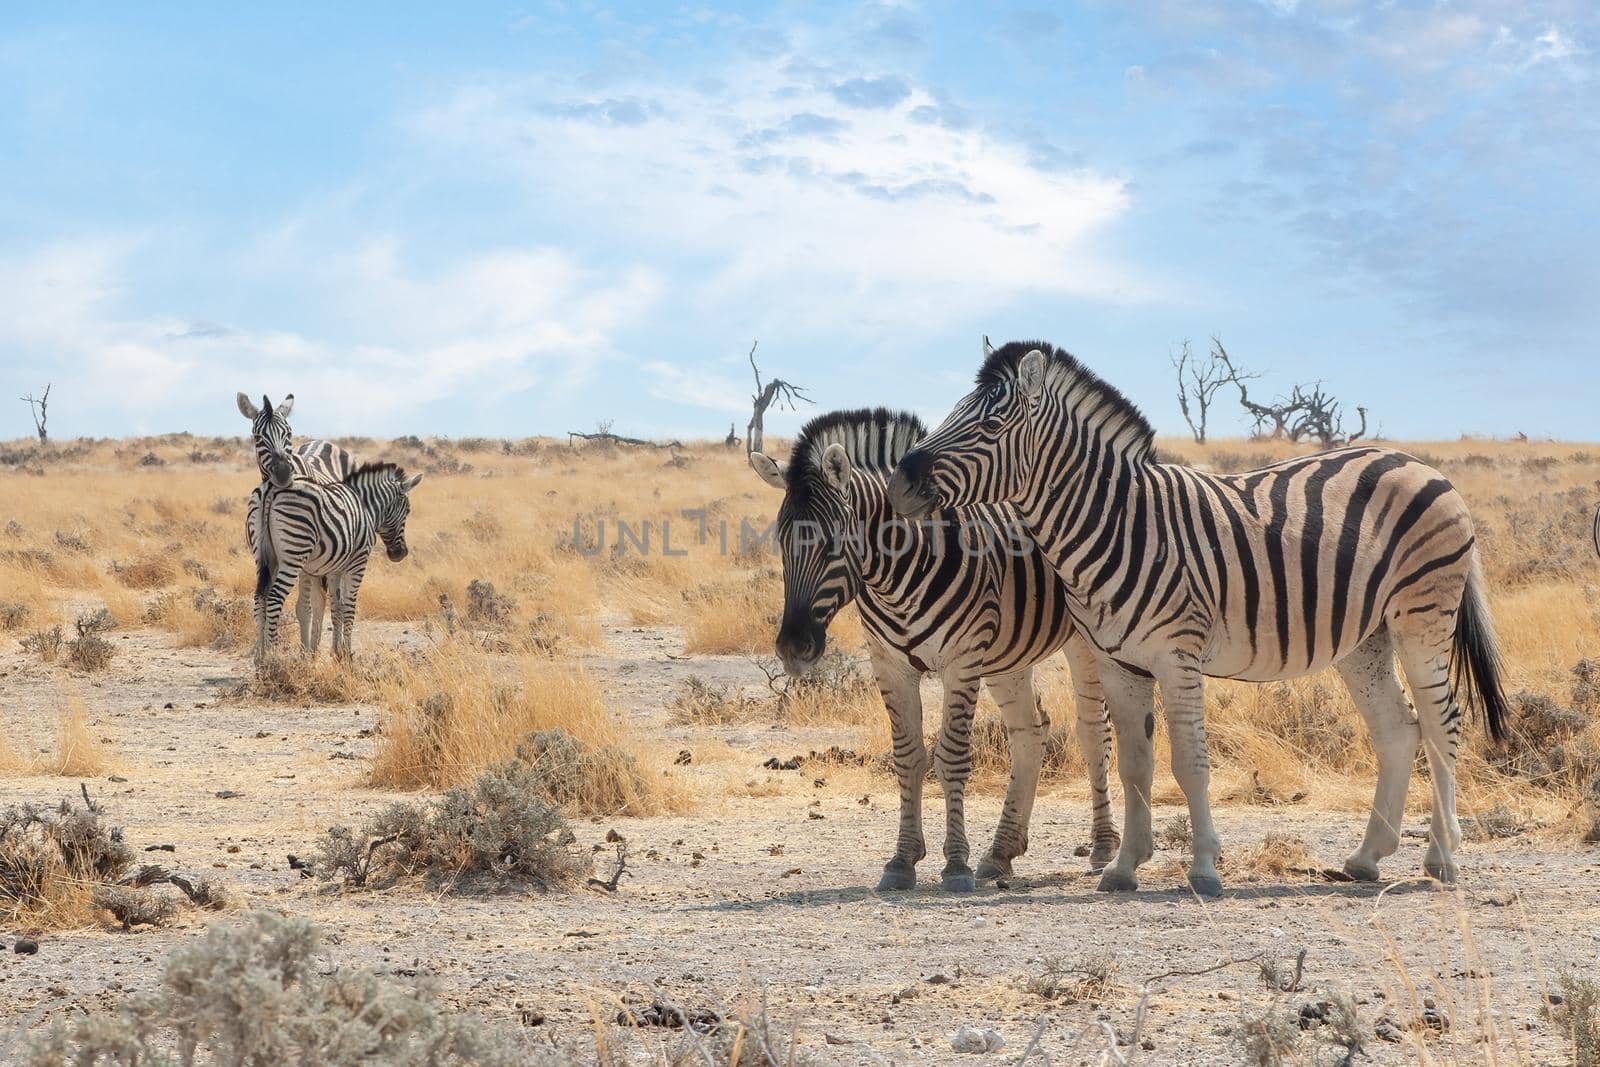 Burchell's zebras in Namibia by magicbones